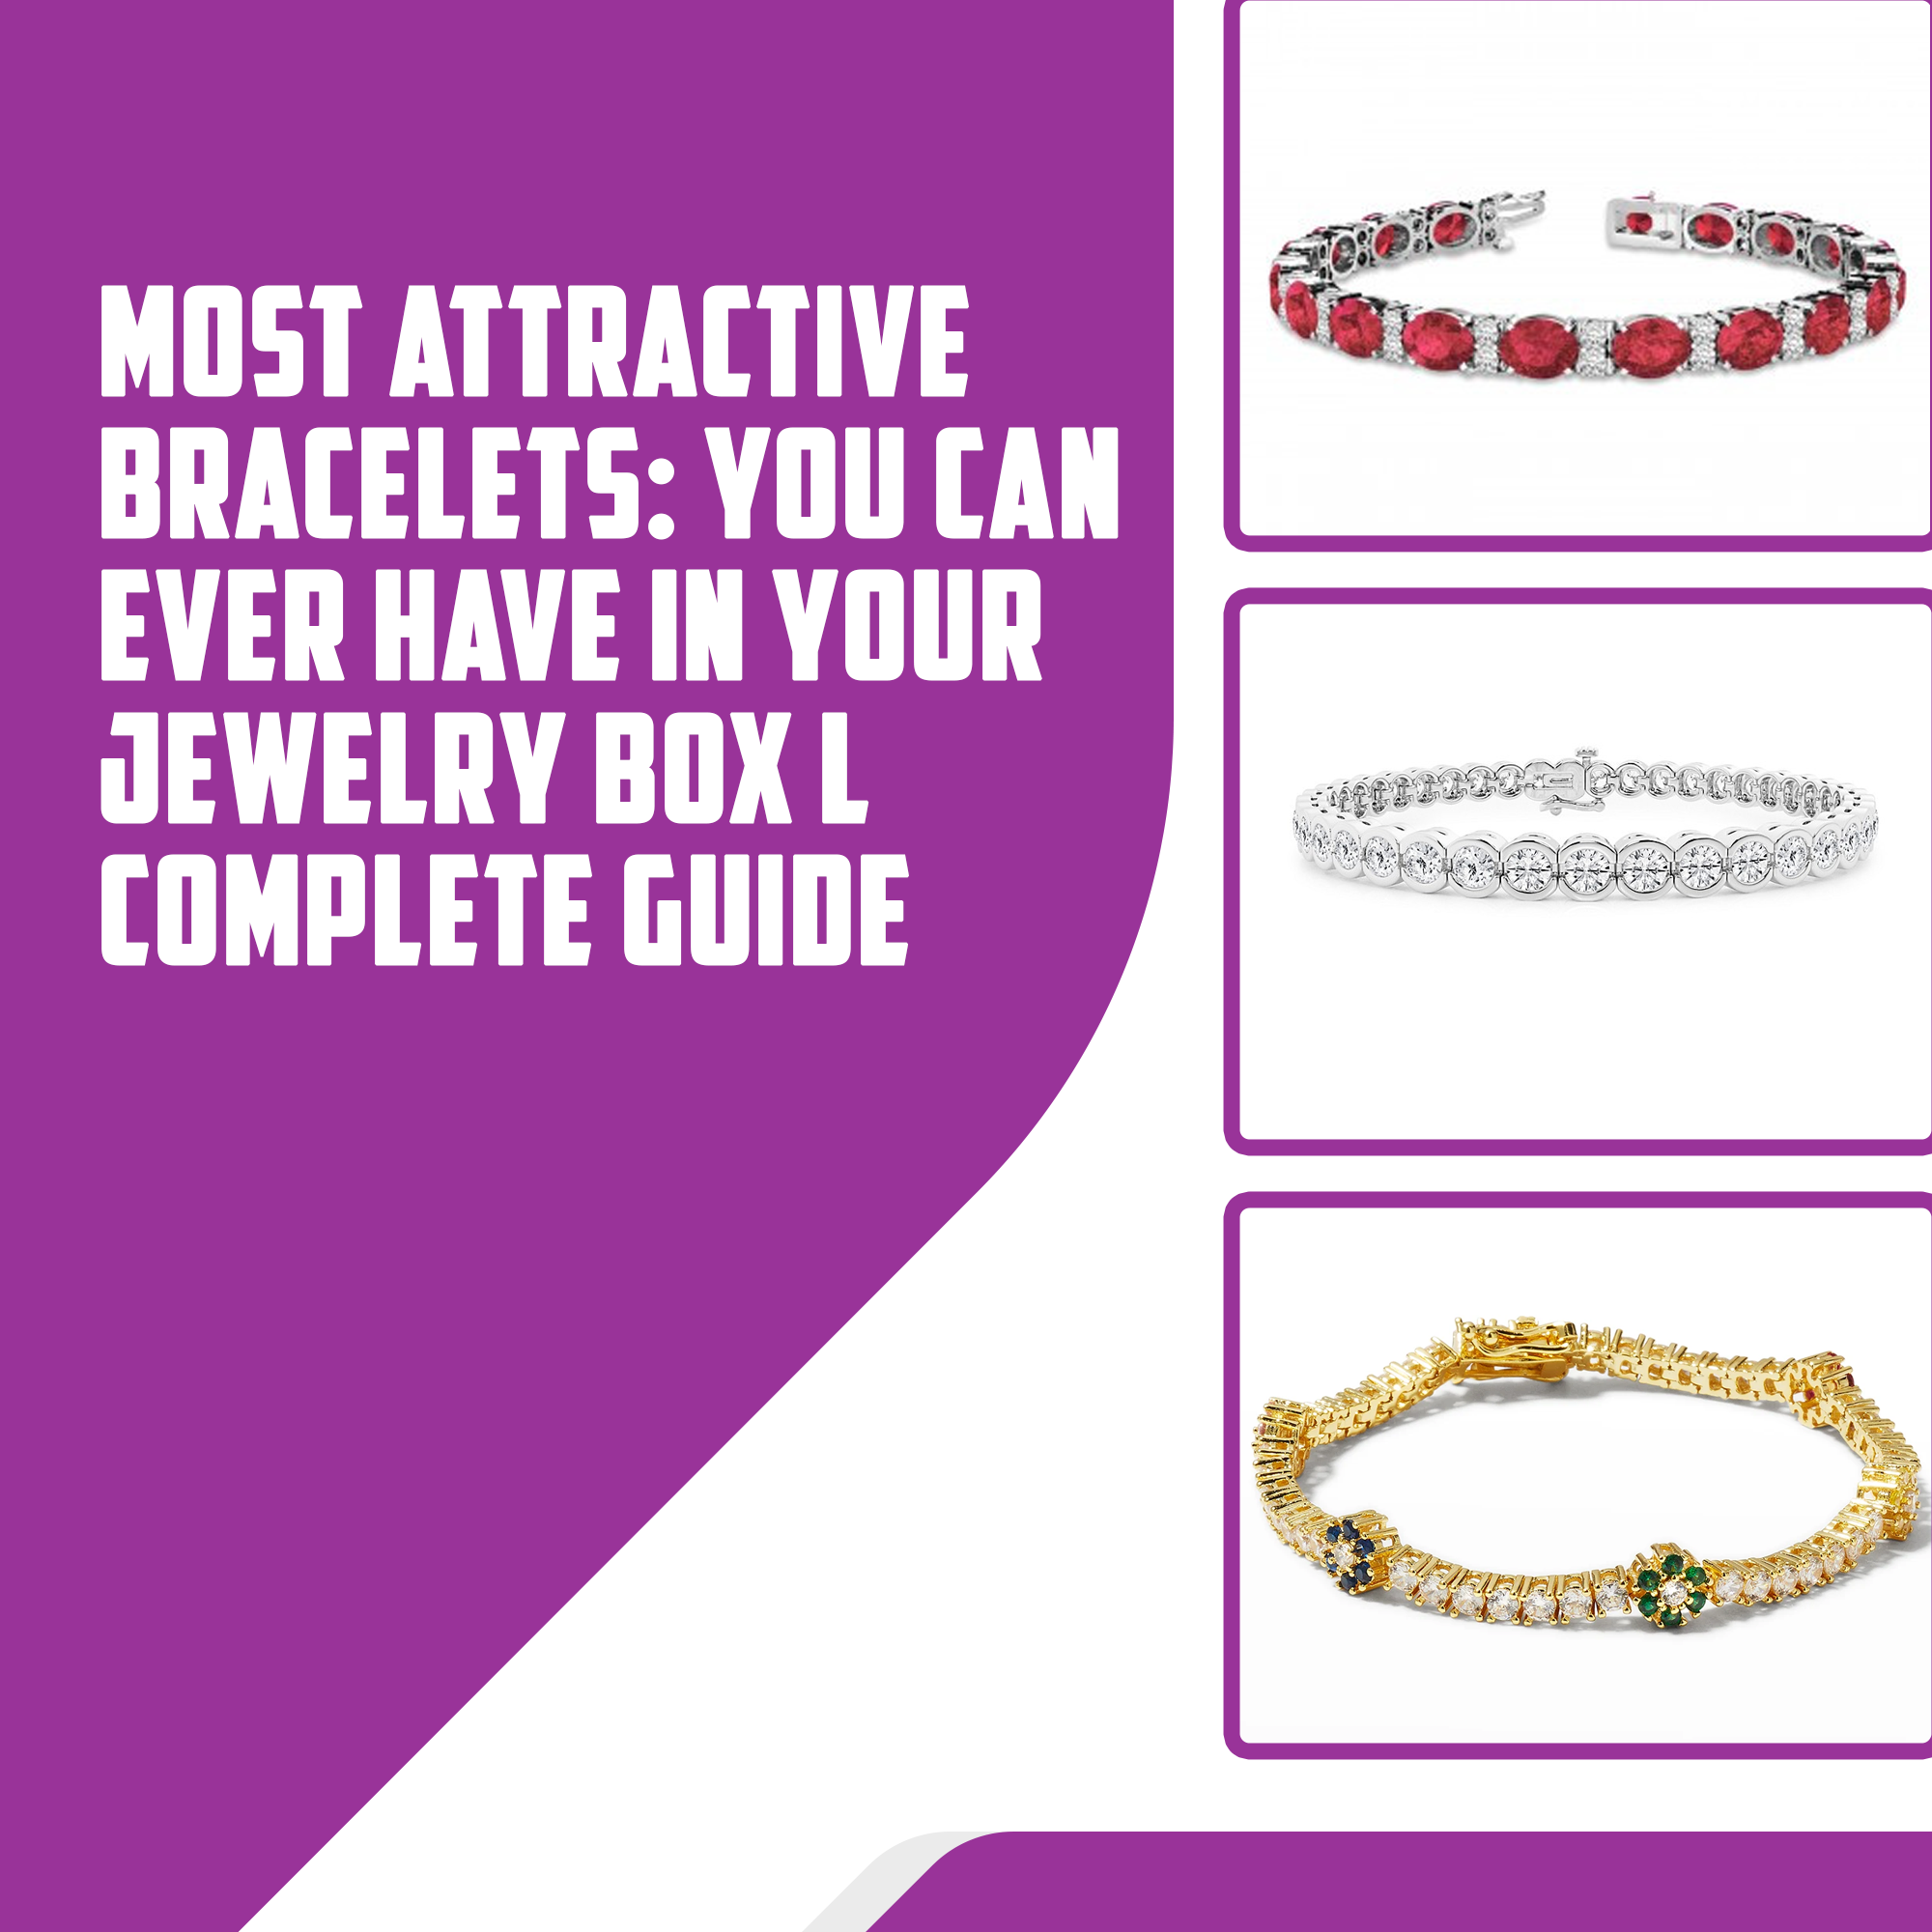 Most Attractive Bracelets: You Can Ever Have In Your Jewelry Box l Complete Guide